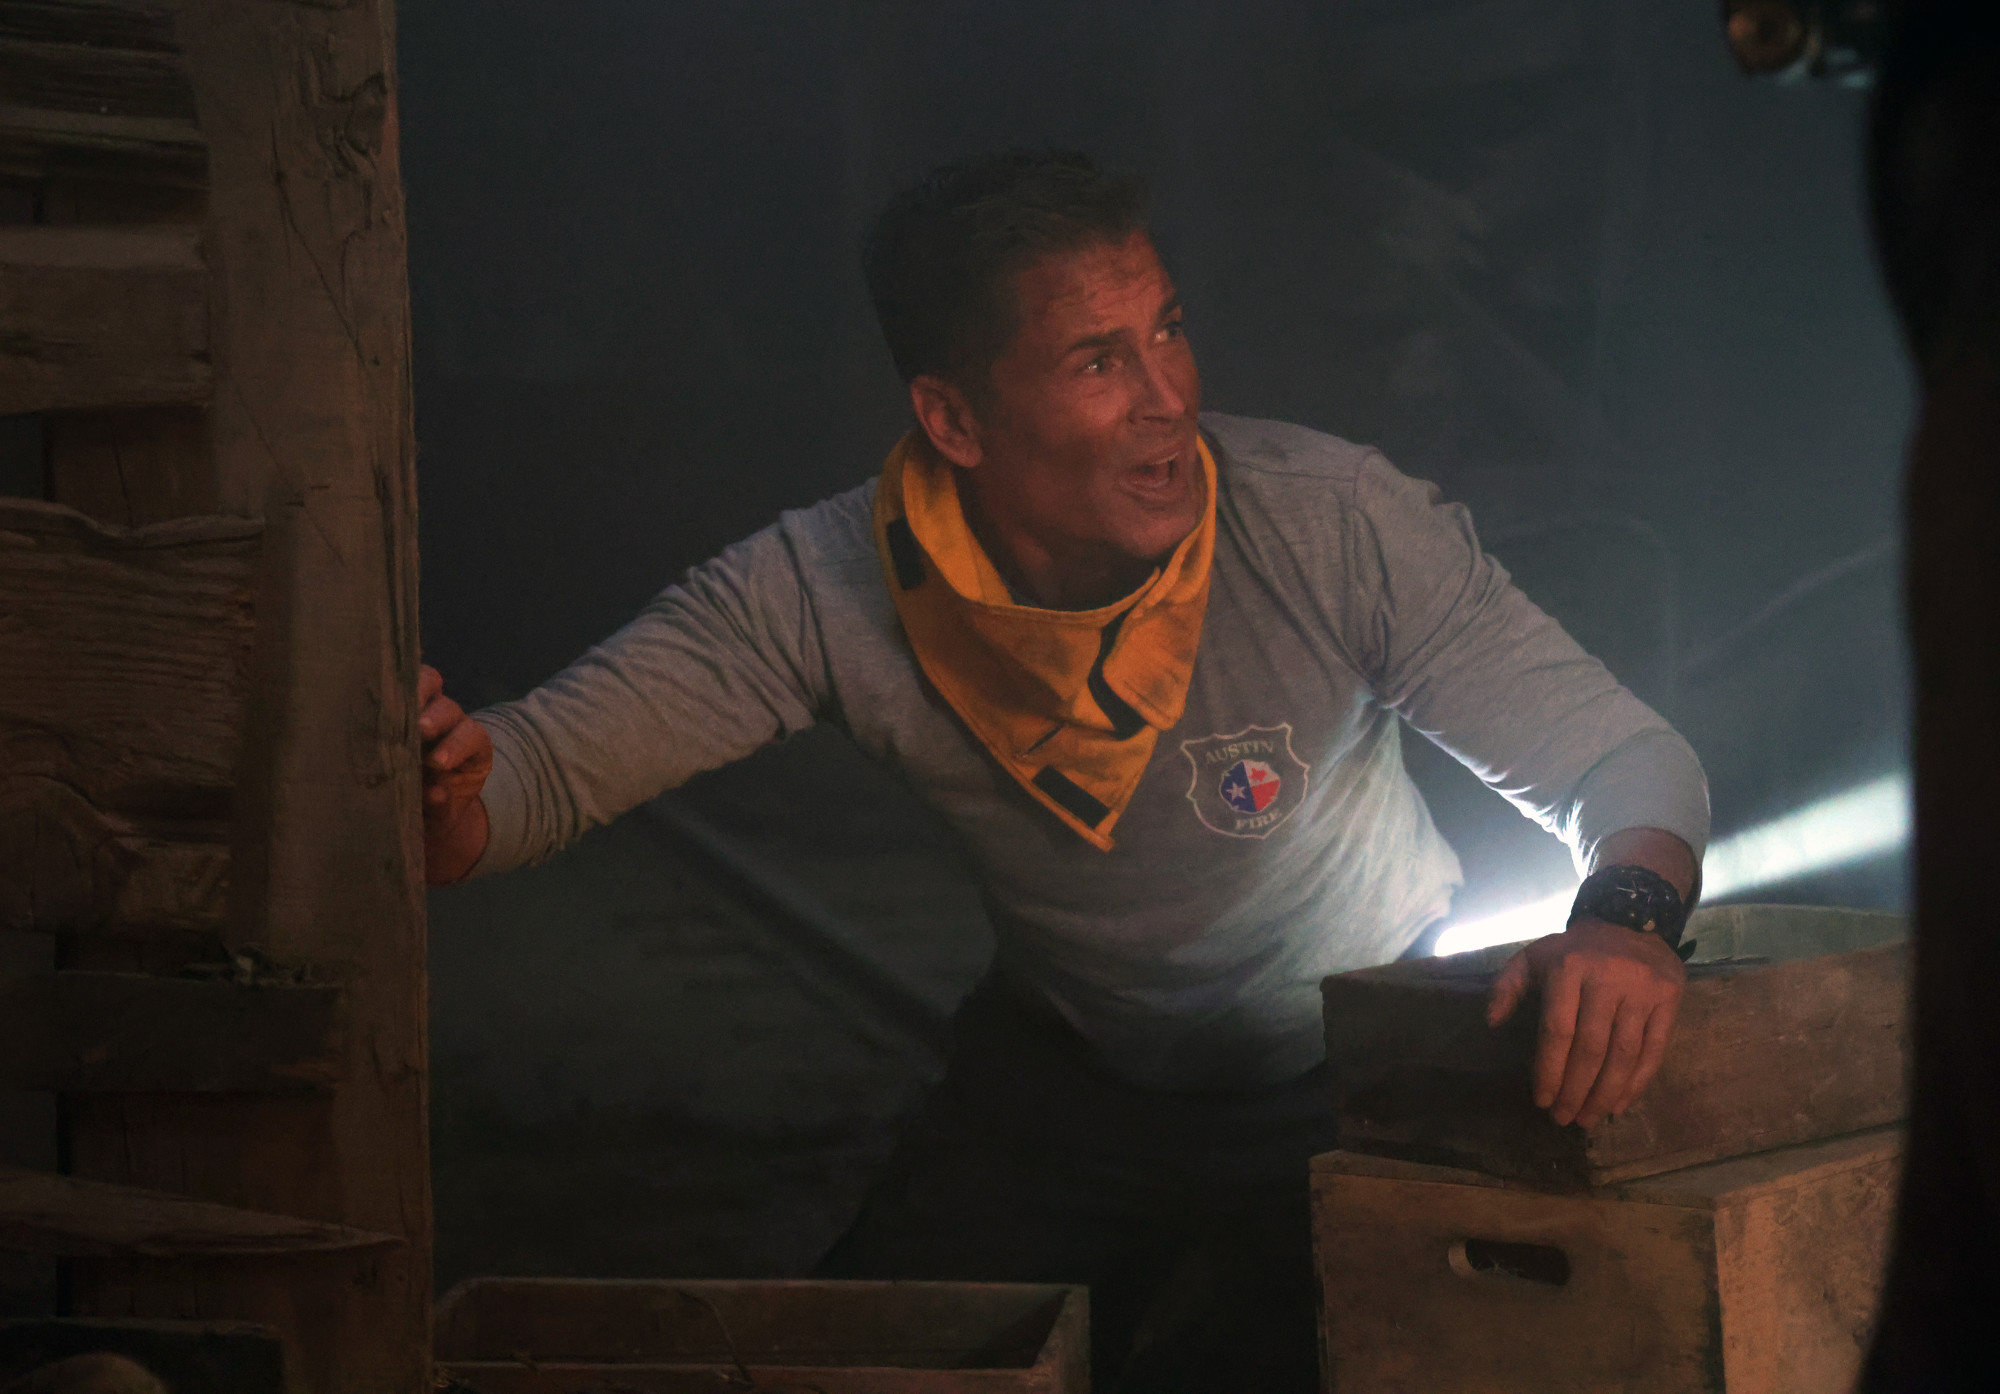 9-1-1: LONE STAR: Rob Lowe in the “Hold The Line” episode of 9-1-1: LONE STAR airing Monday, Feb. 1 (9:01-10:00 PM ET/PT) on FOX. © 2021 Fox Media LLC. CR: Jordin Althaus/FOX.